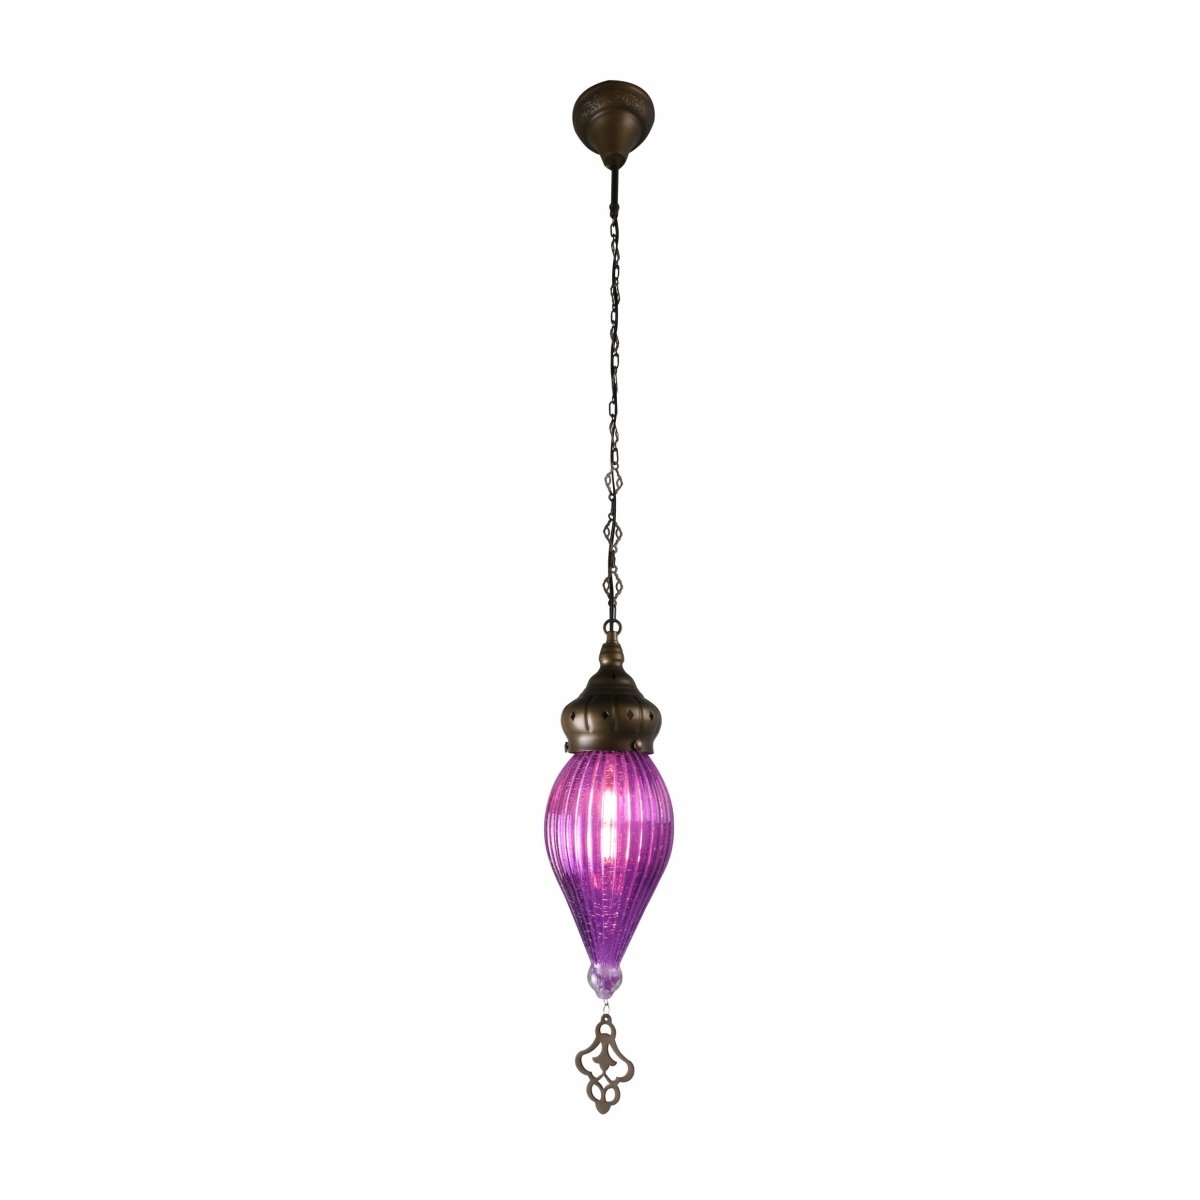 Main image of Moroccan Style Antique Brass and Purple Glass Oriental Ceiling Pendant Light E27 | TEKLED 158-195583